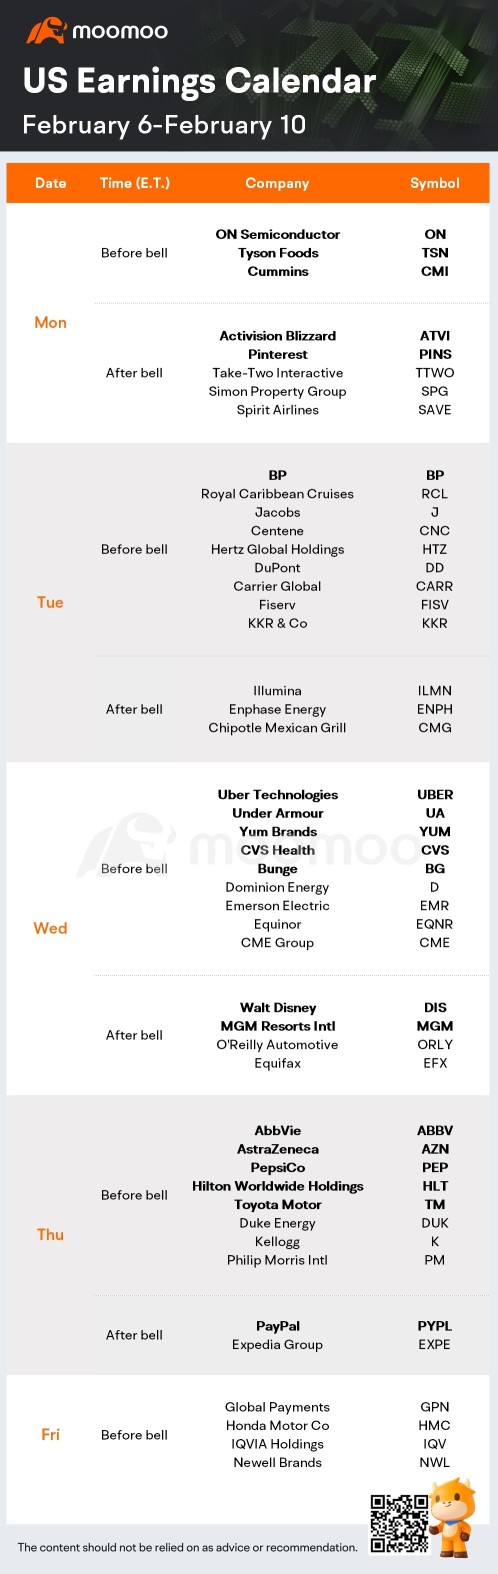 What to Expect in the Week Ahead (Powell Speaks; DIS, PYPL and UBER Earnings)